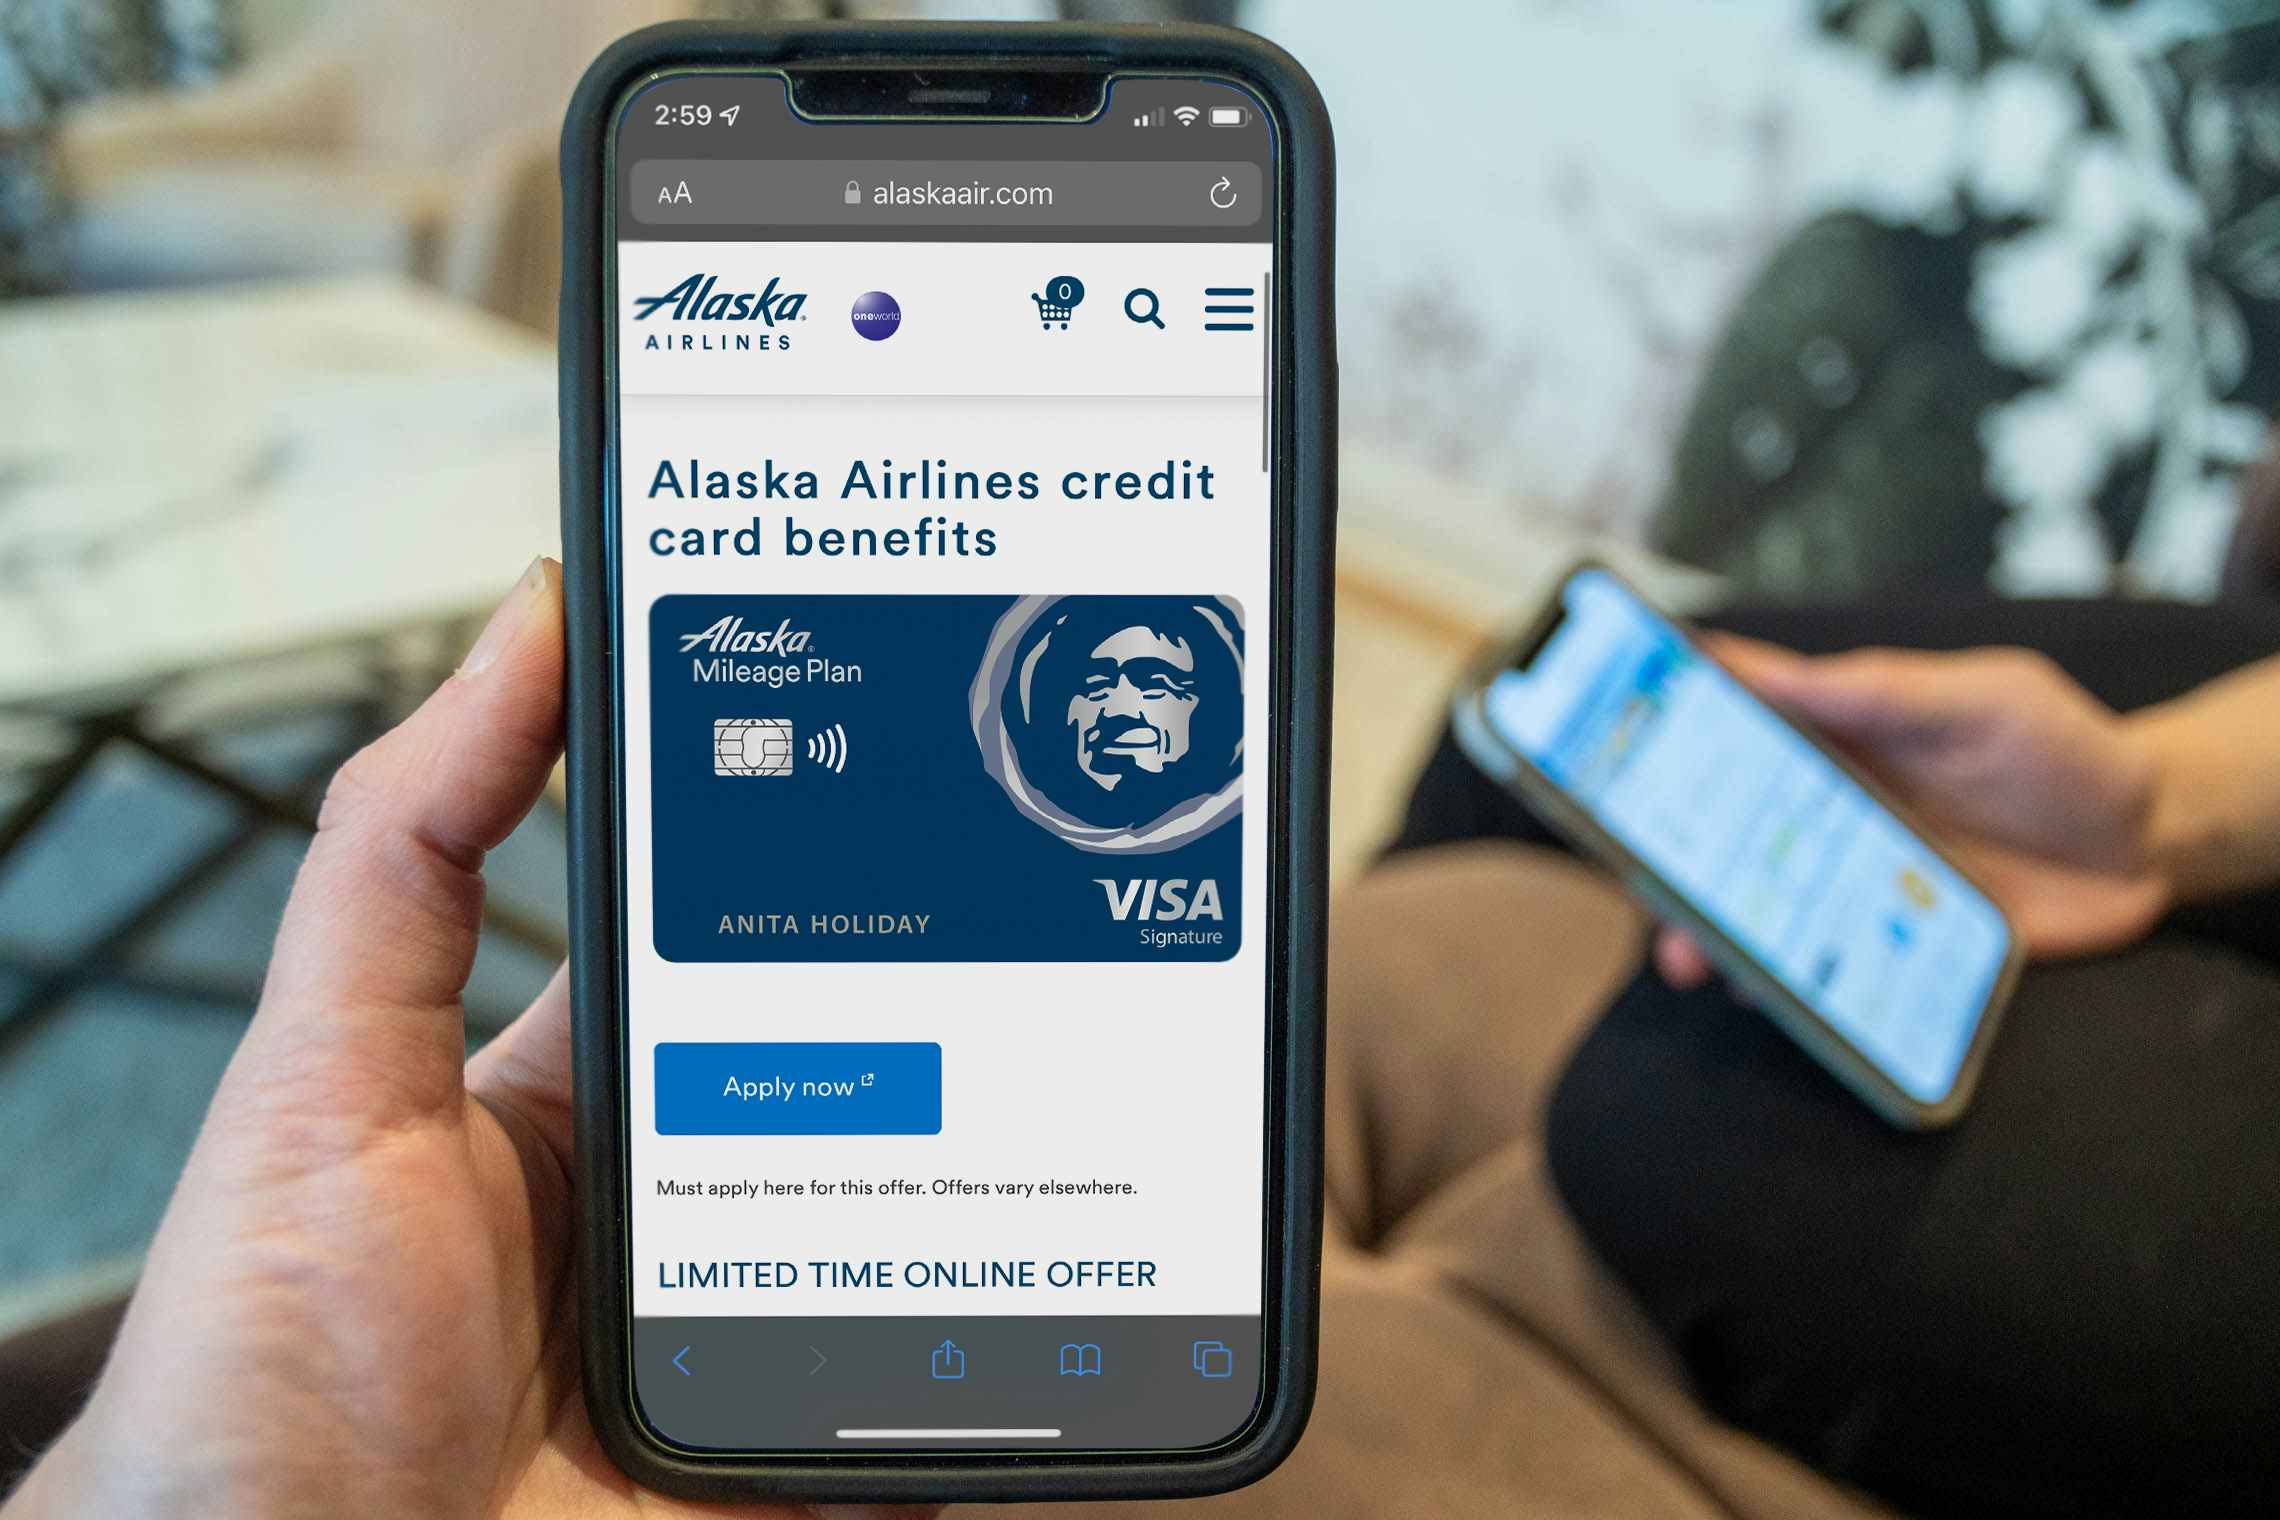 A person holding a phone with the Alaska Airlines visa card information displayed with someone else holding their own phone in the background